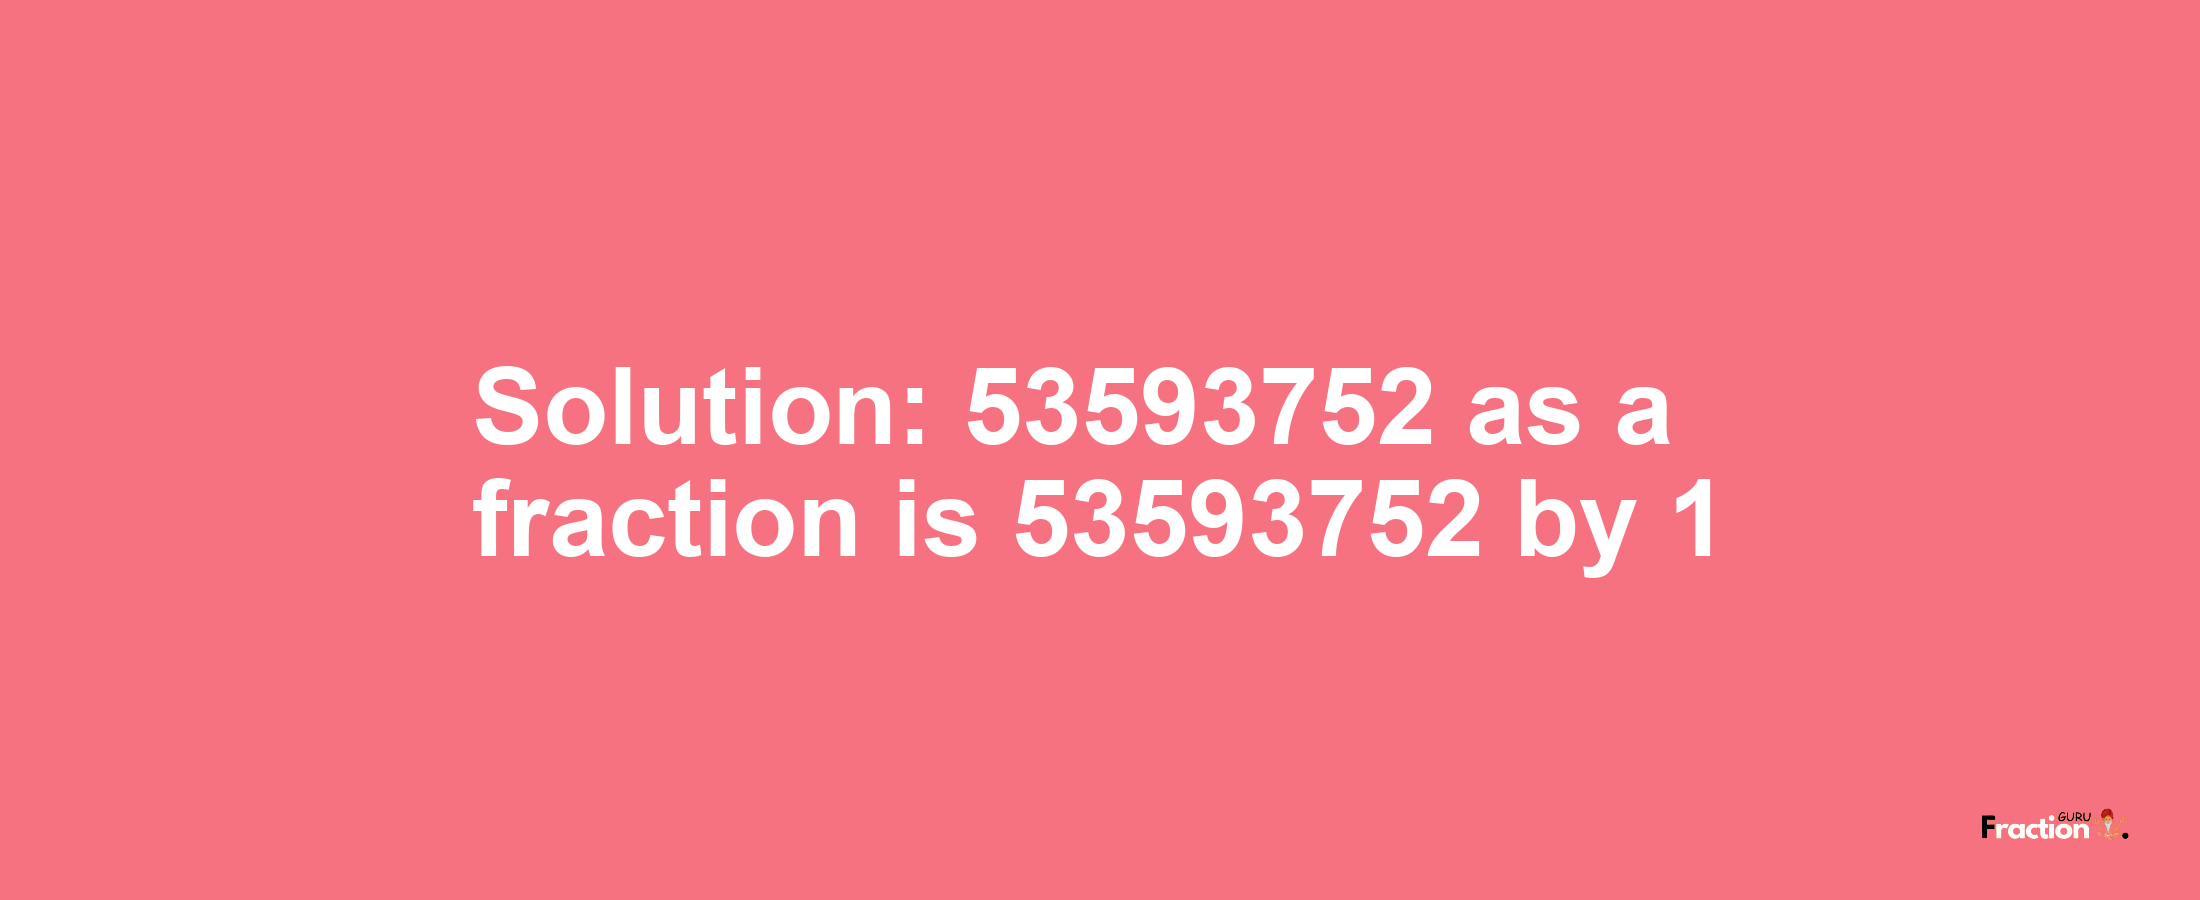 Solution:53593752 as a fraction is 53593752/1